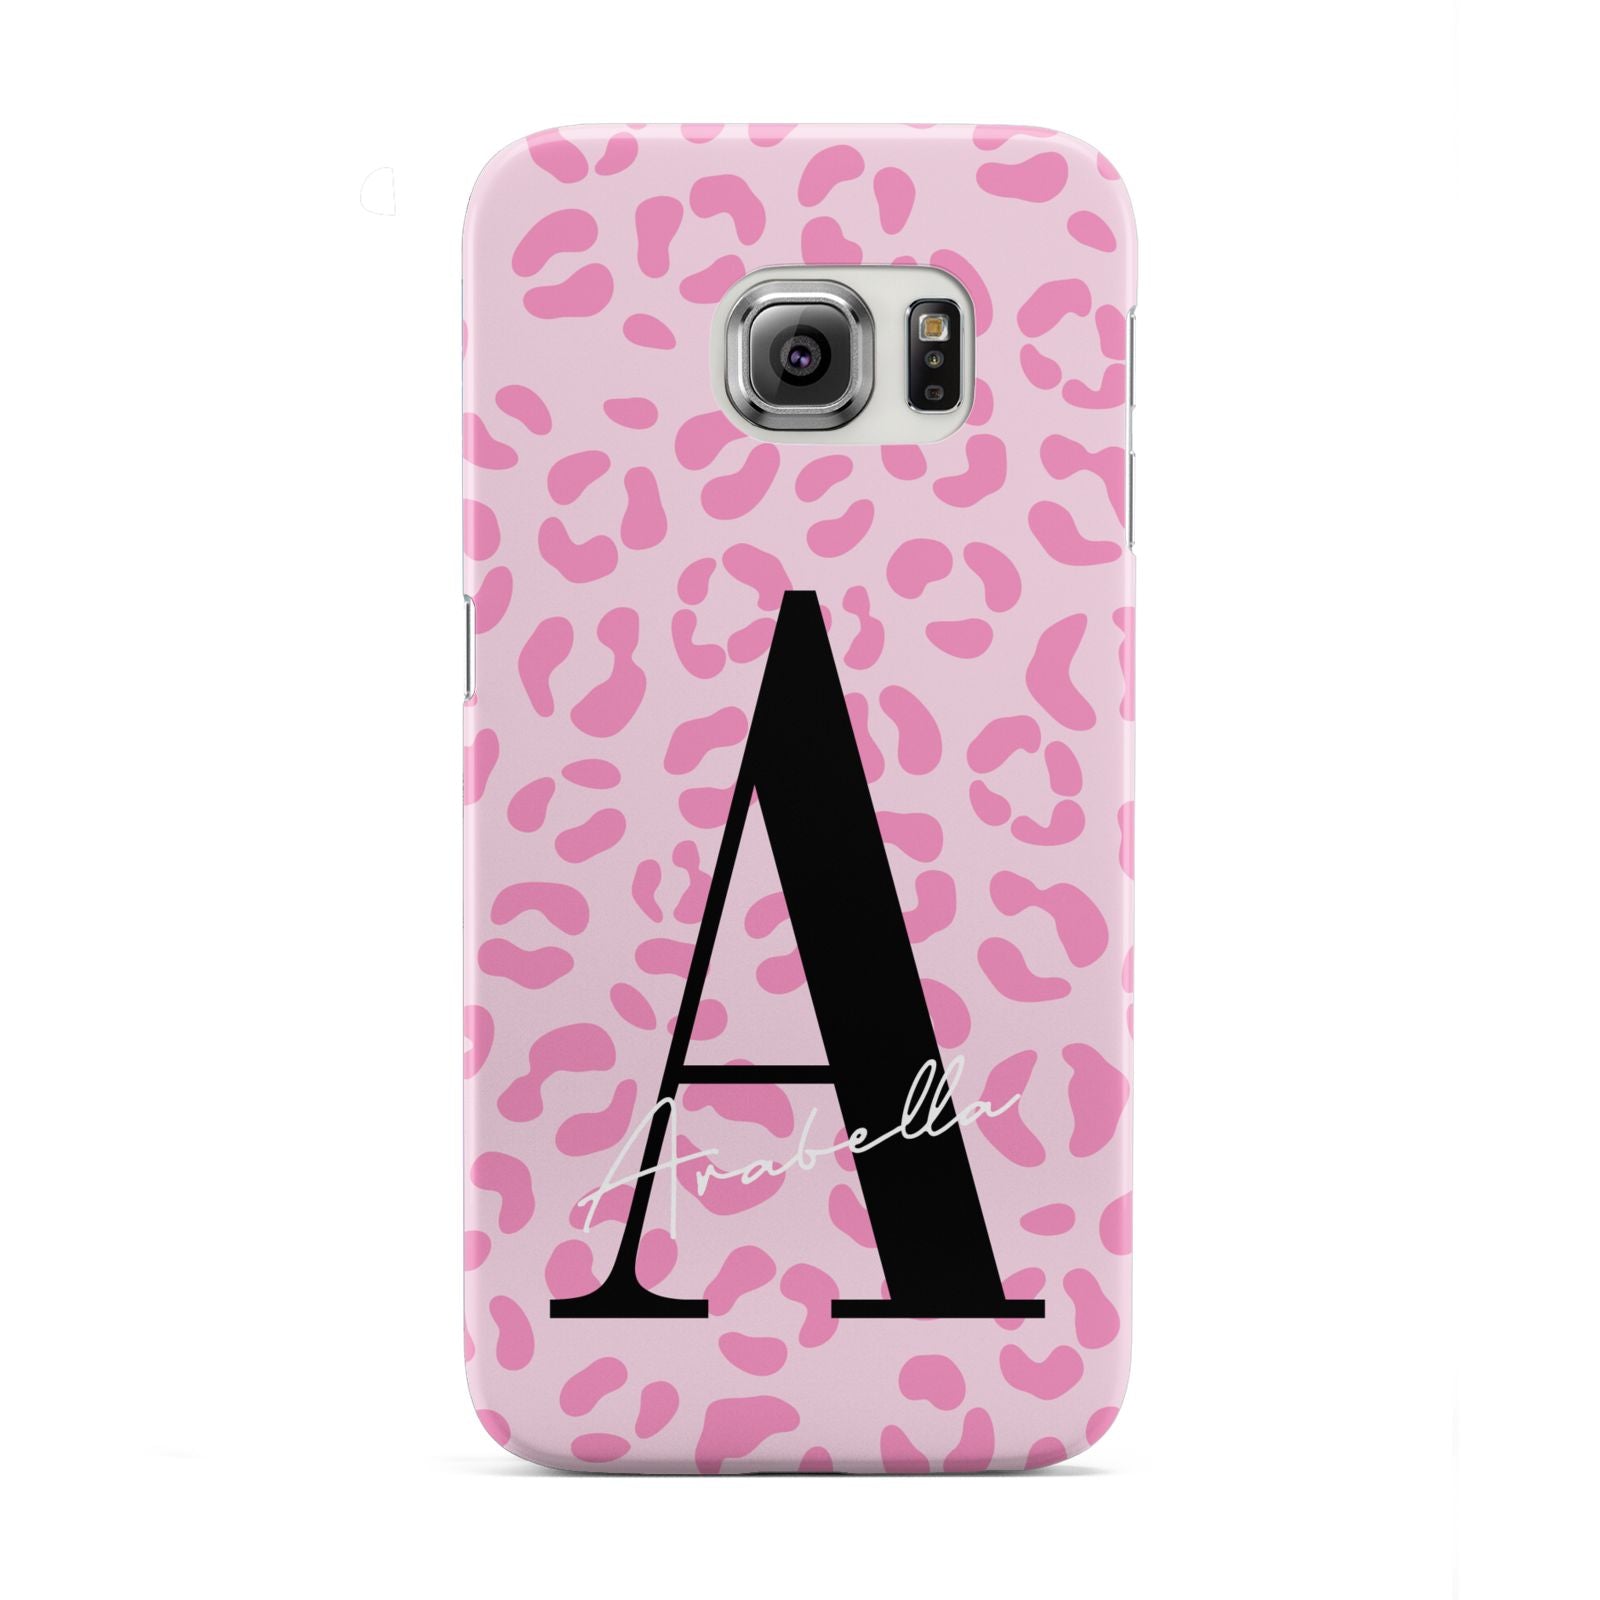 Personalised Pink Leopard Print Samsung Galaxy S6 Edge Case